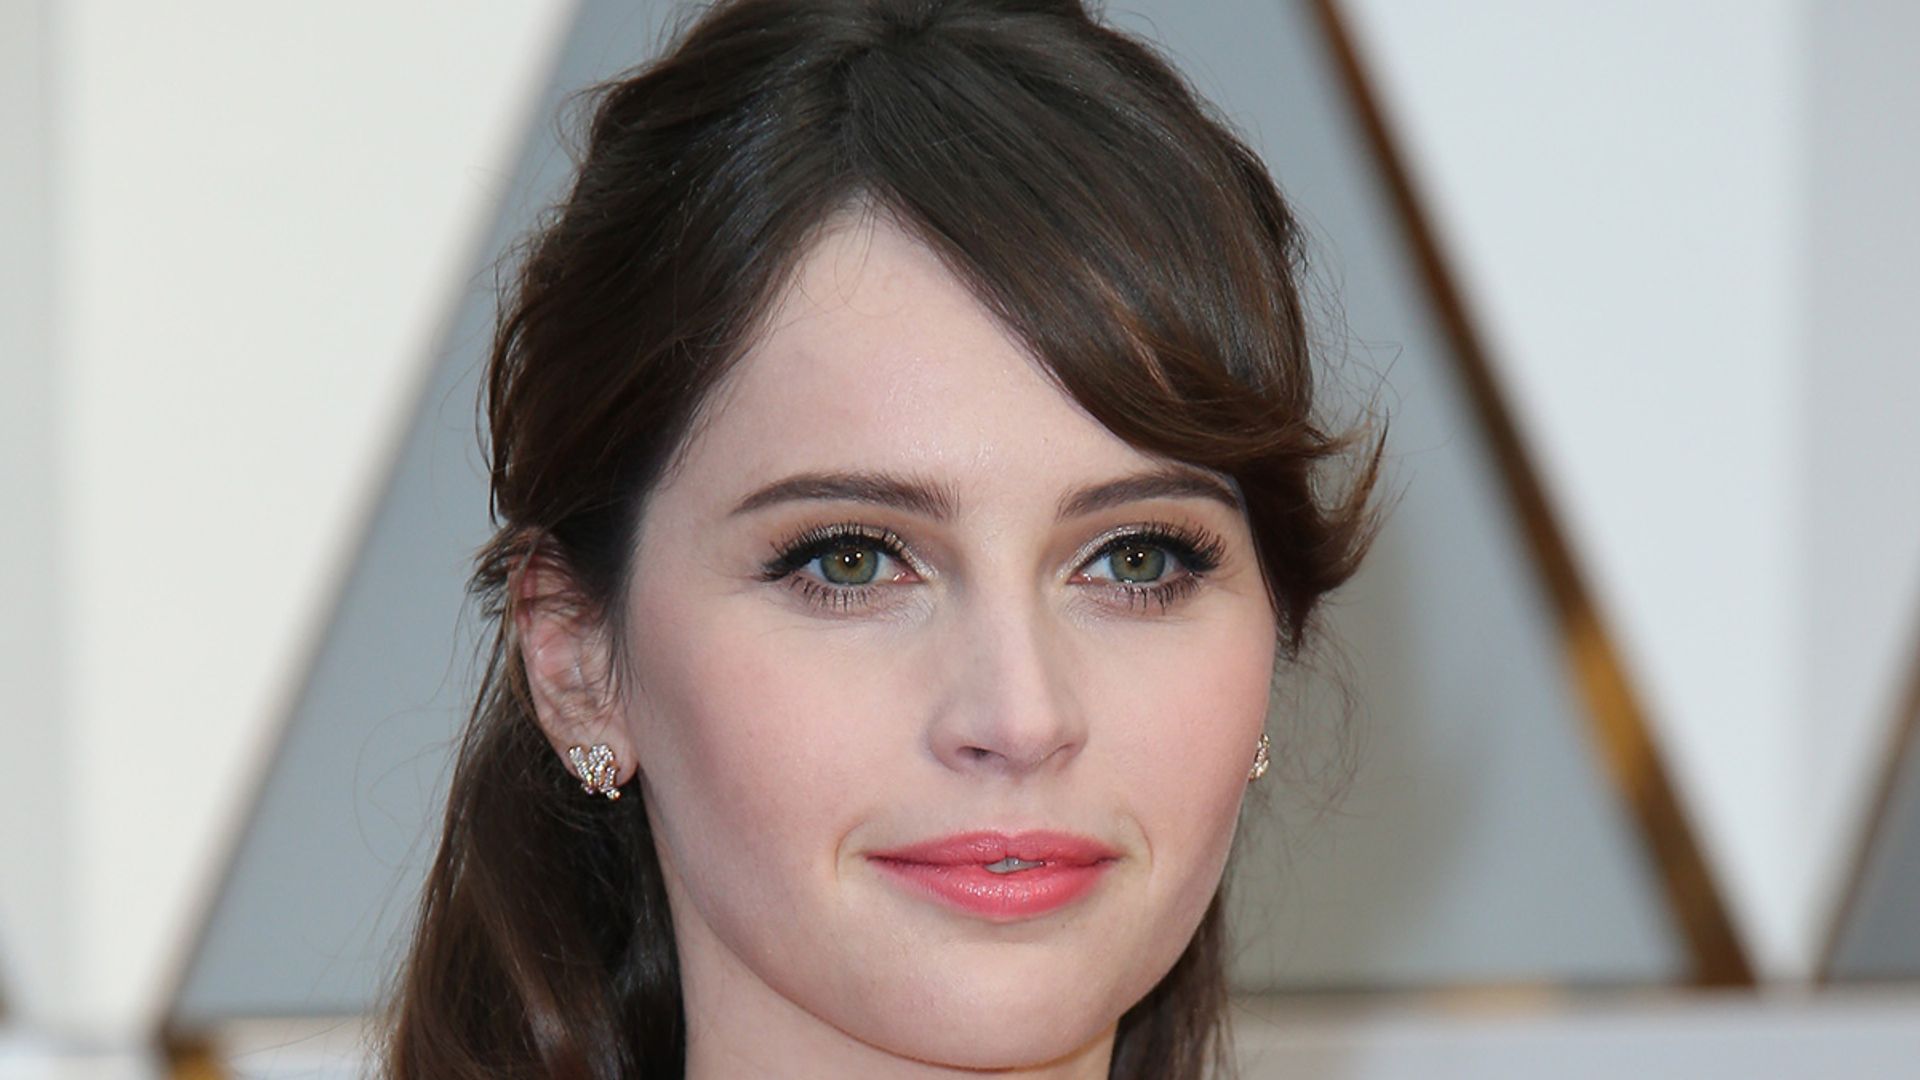 Felicity Jones reveals she is pregnant with her first child - see her growing bump